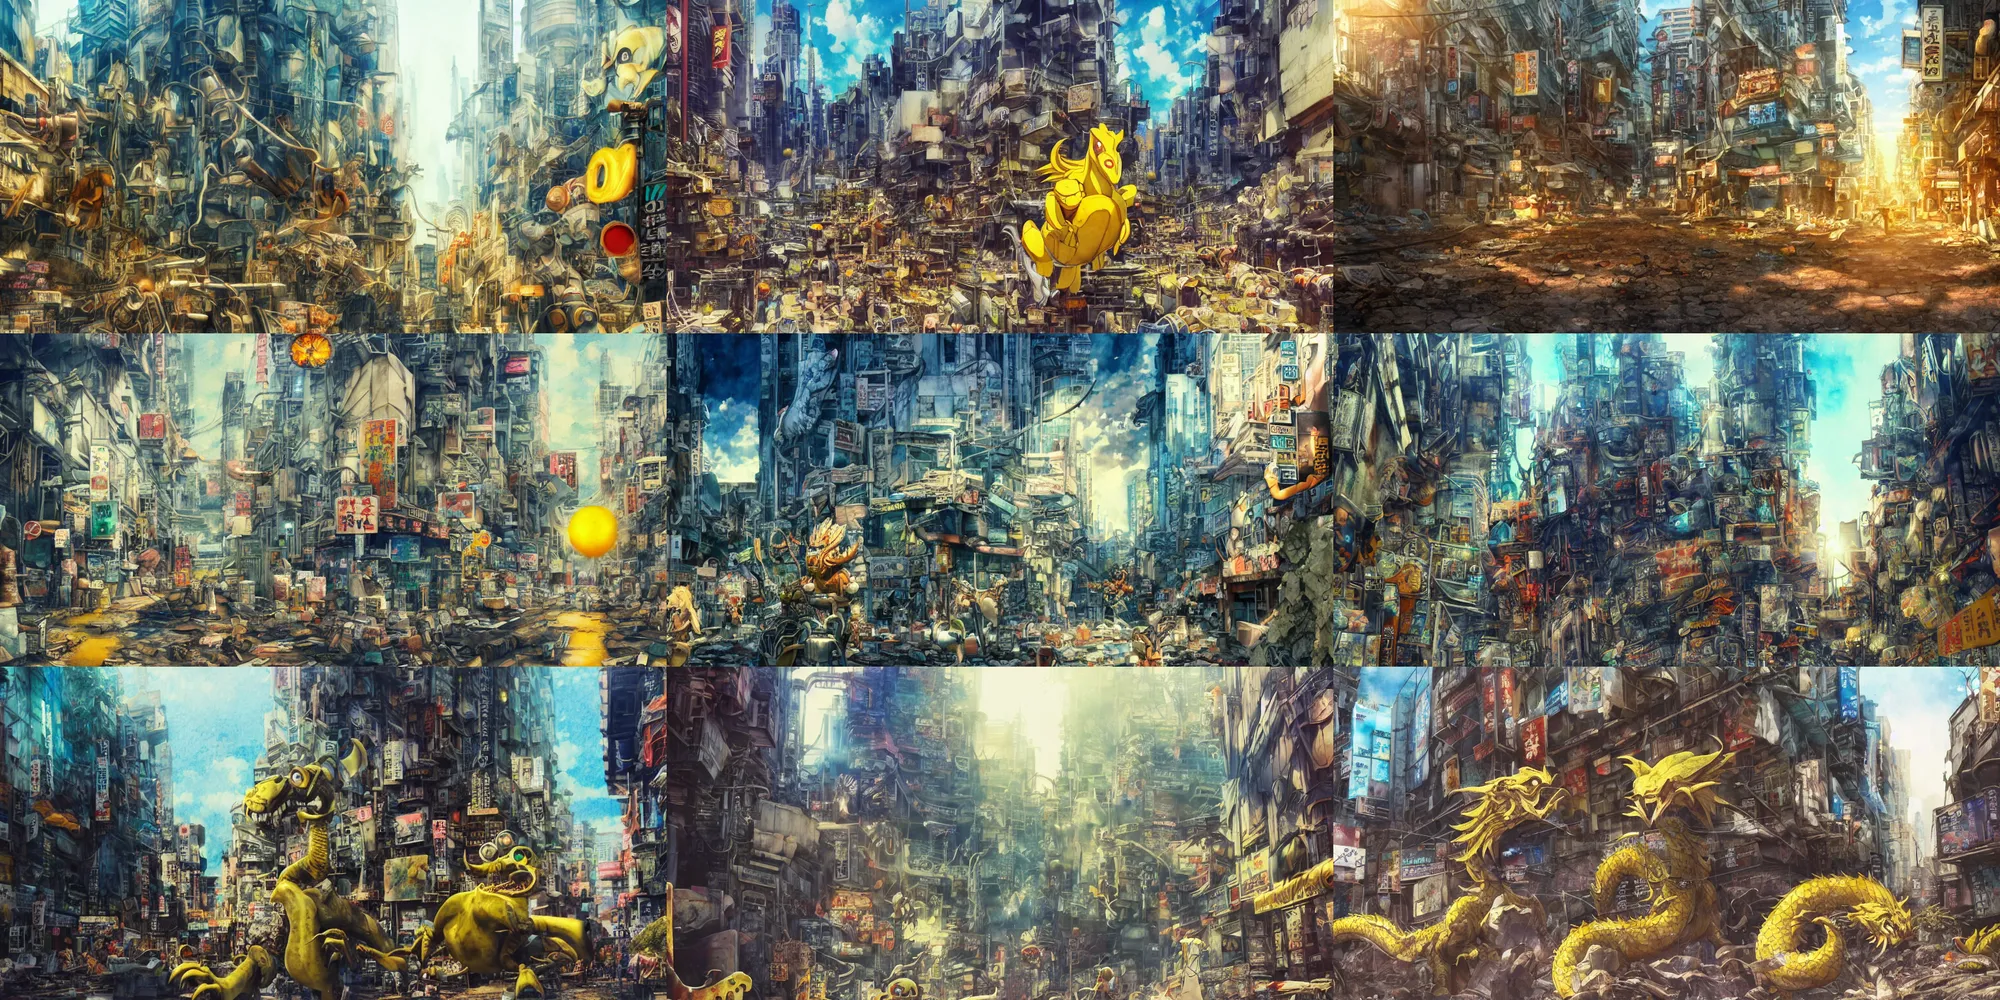 Prompt: incredible anime movie scene, low angle, skyscraper, watercolor, underwater market, wide path, coral, harsh bloom lighting, rim light, abandoned city, paper texture, movie scene, caustics shadows, deserted shinjuku junk town, old pawn shop, bright sun ground, pipes, yellow dragon head festival, robot monster in background